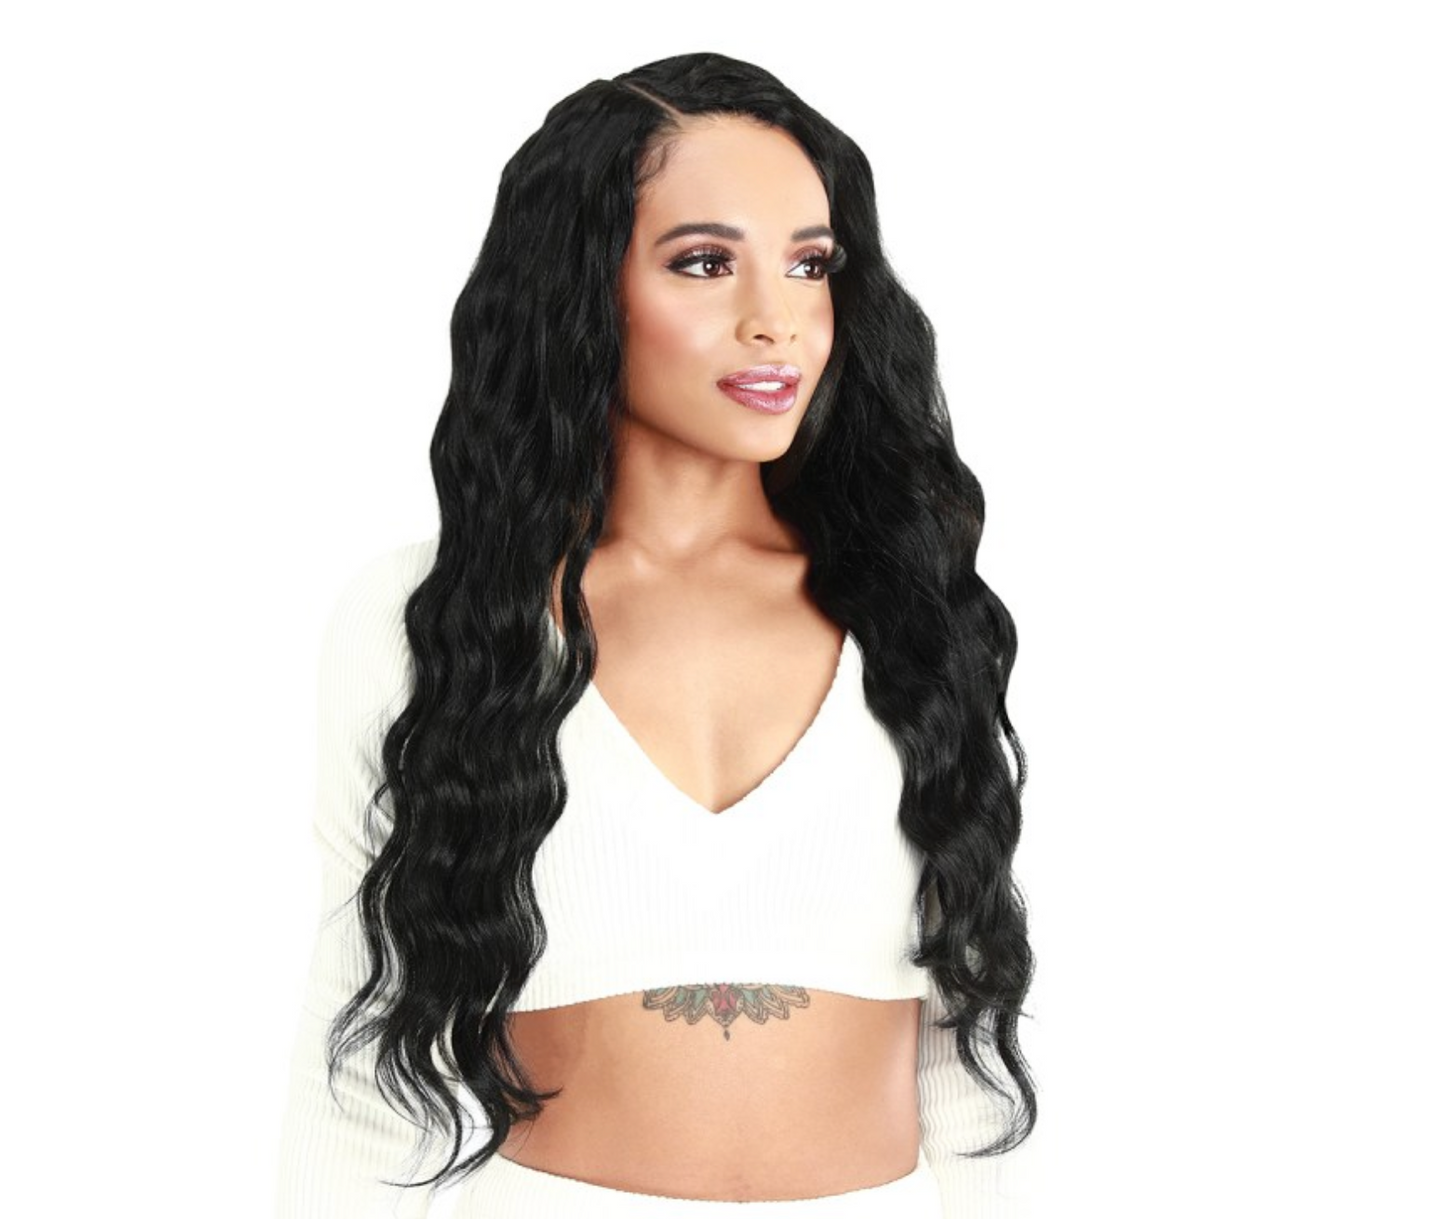 Zury Natural Dream Clip On Hair Extensions Ocean Wave 18”